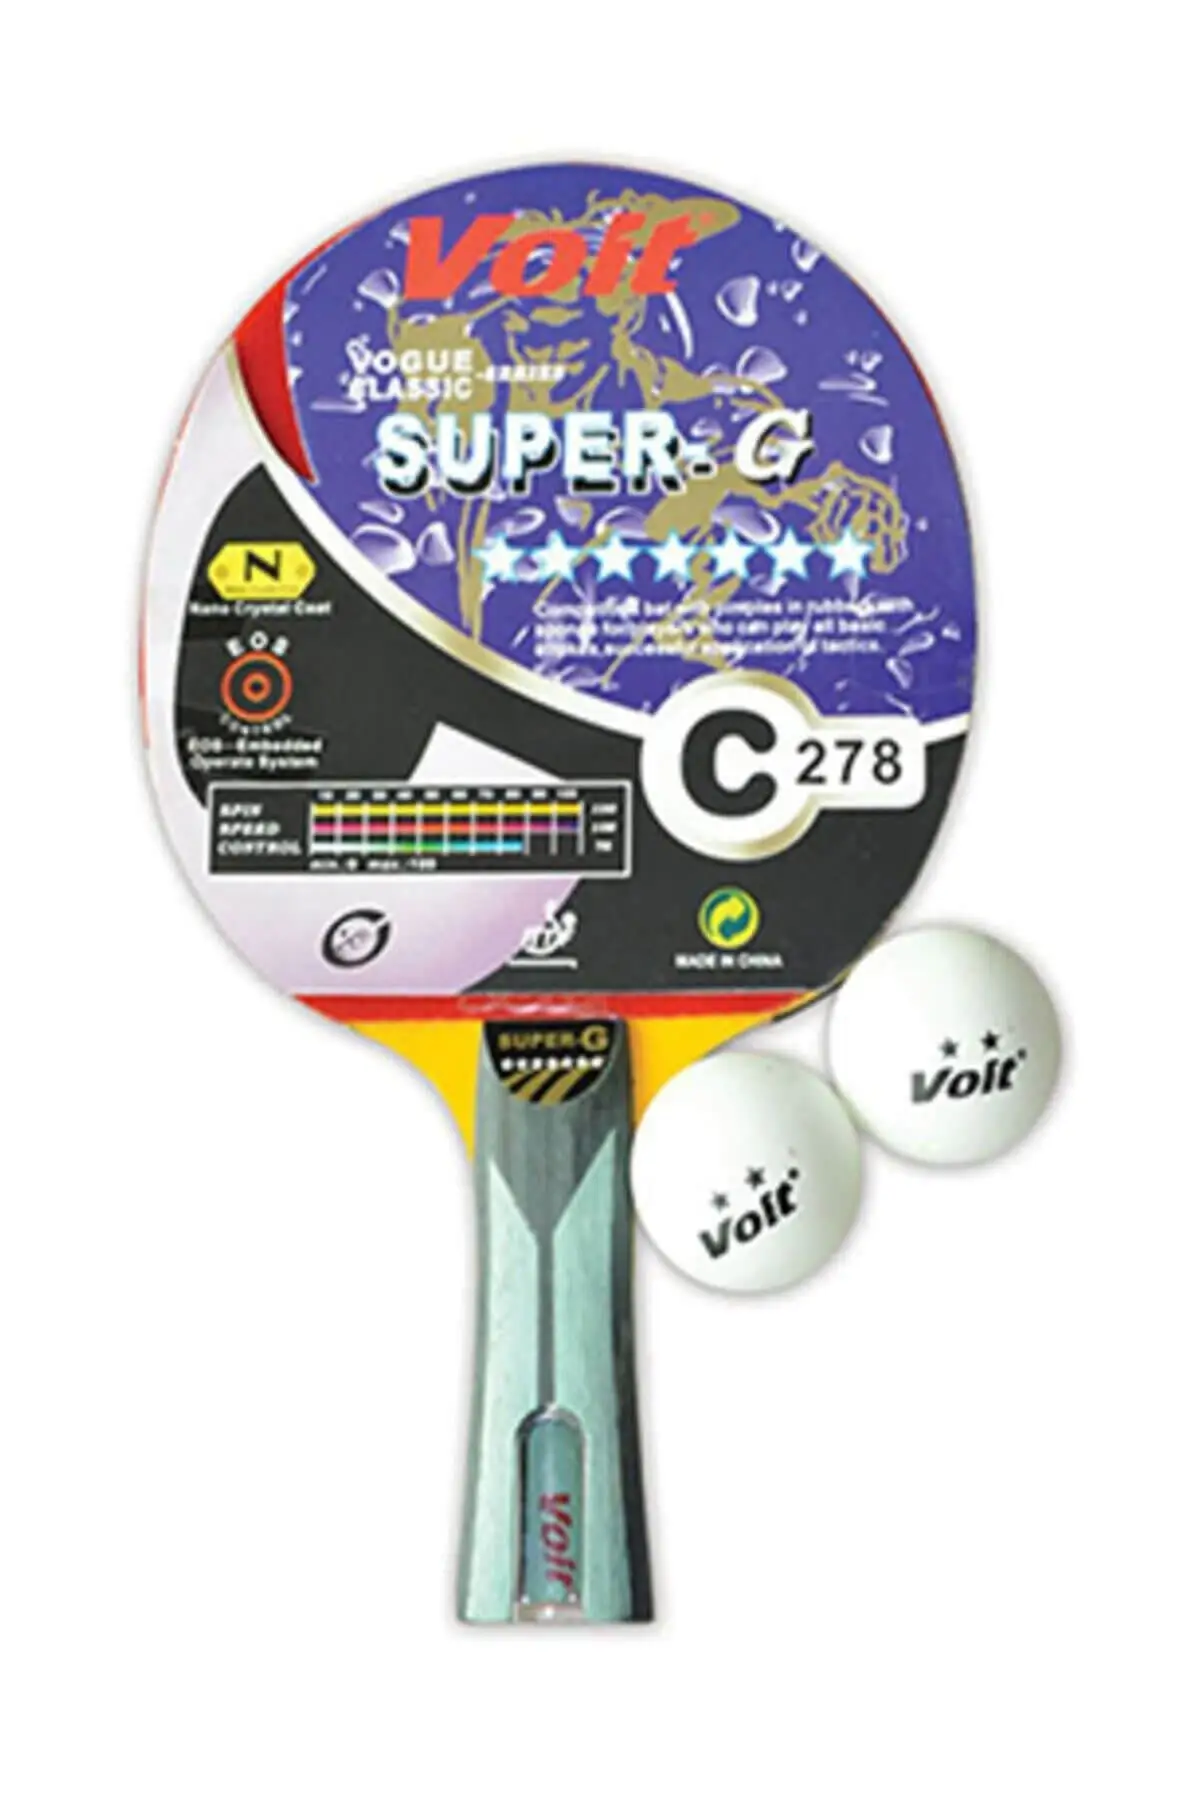 Super-G 7 Star Ping-Pong Racket Ittf Approved 1 VTAK0703 Table Tennis Tennis Equipment & Accessory Outdoor